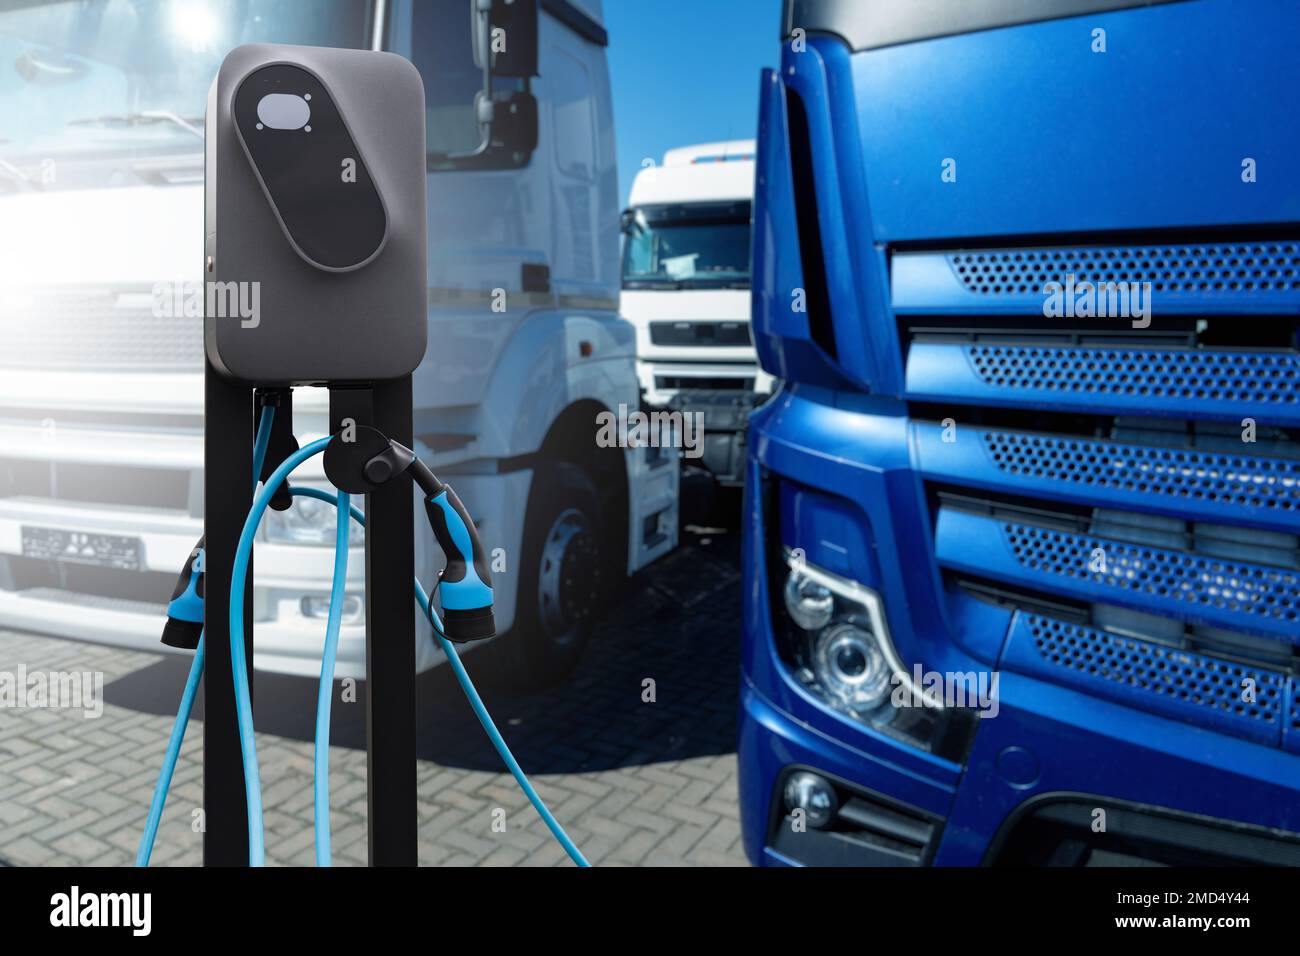 Electric vehicles charging station on a background of a trucks. Concept Stock Photo